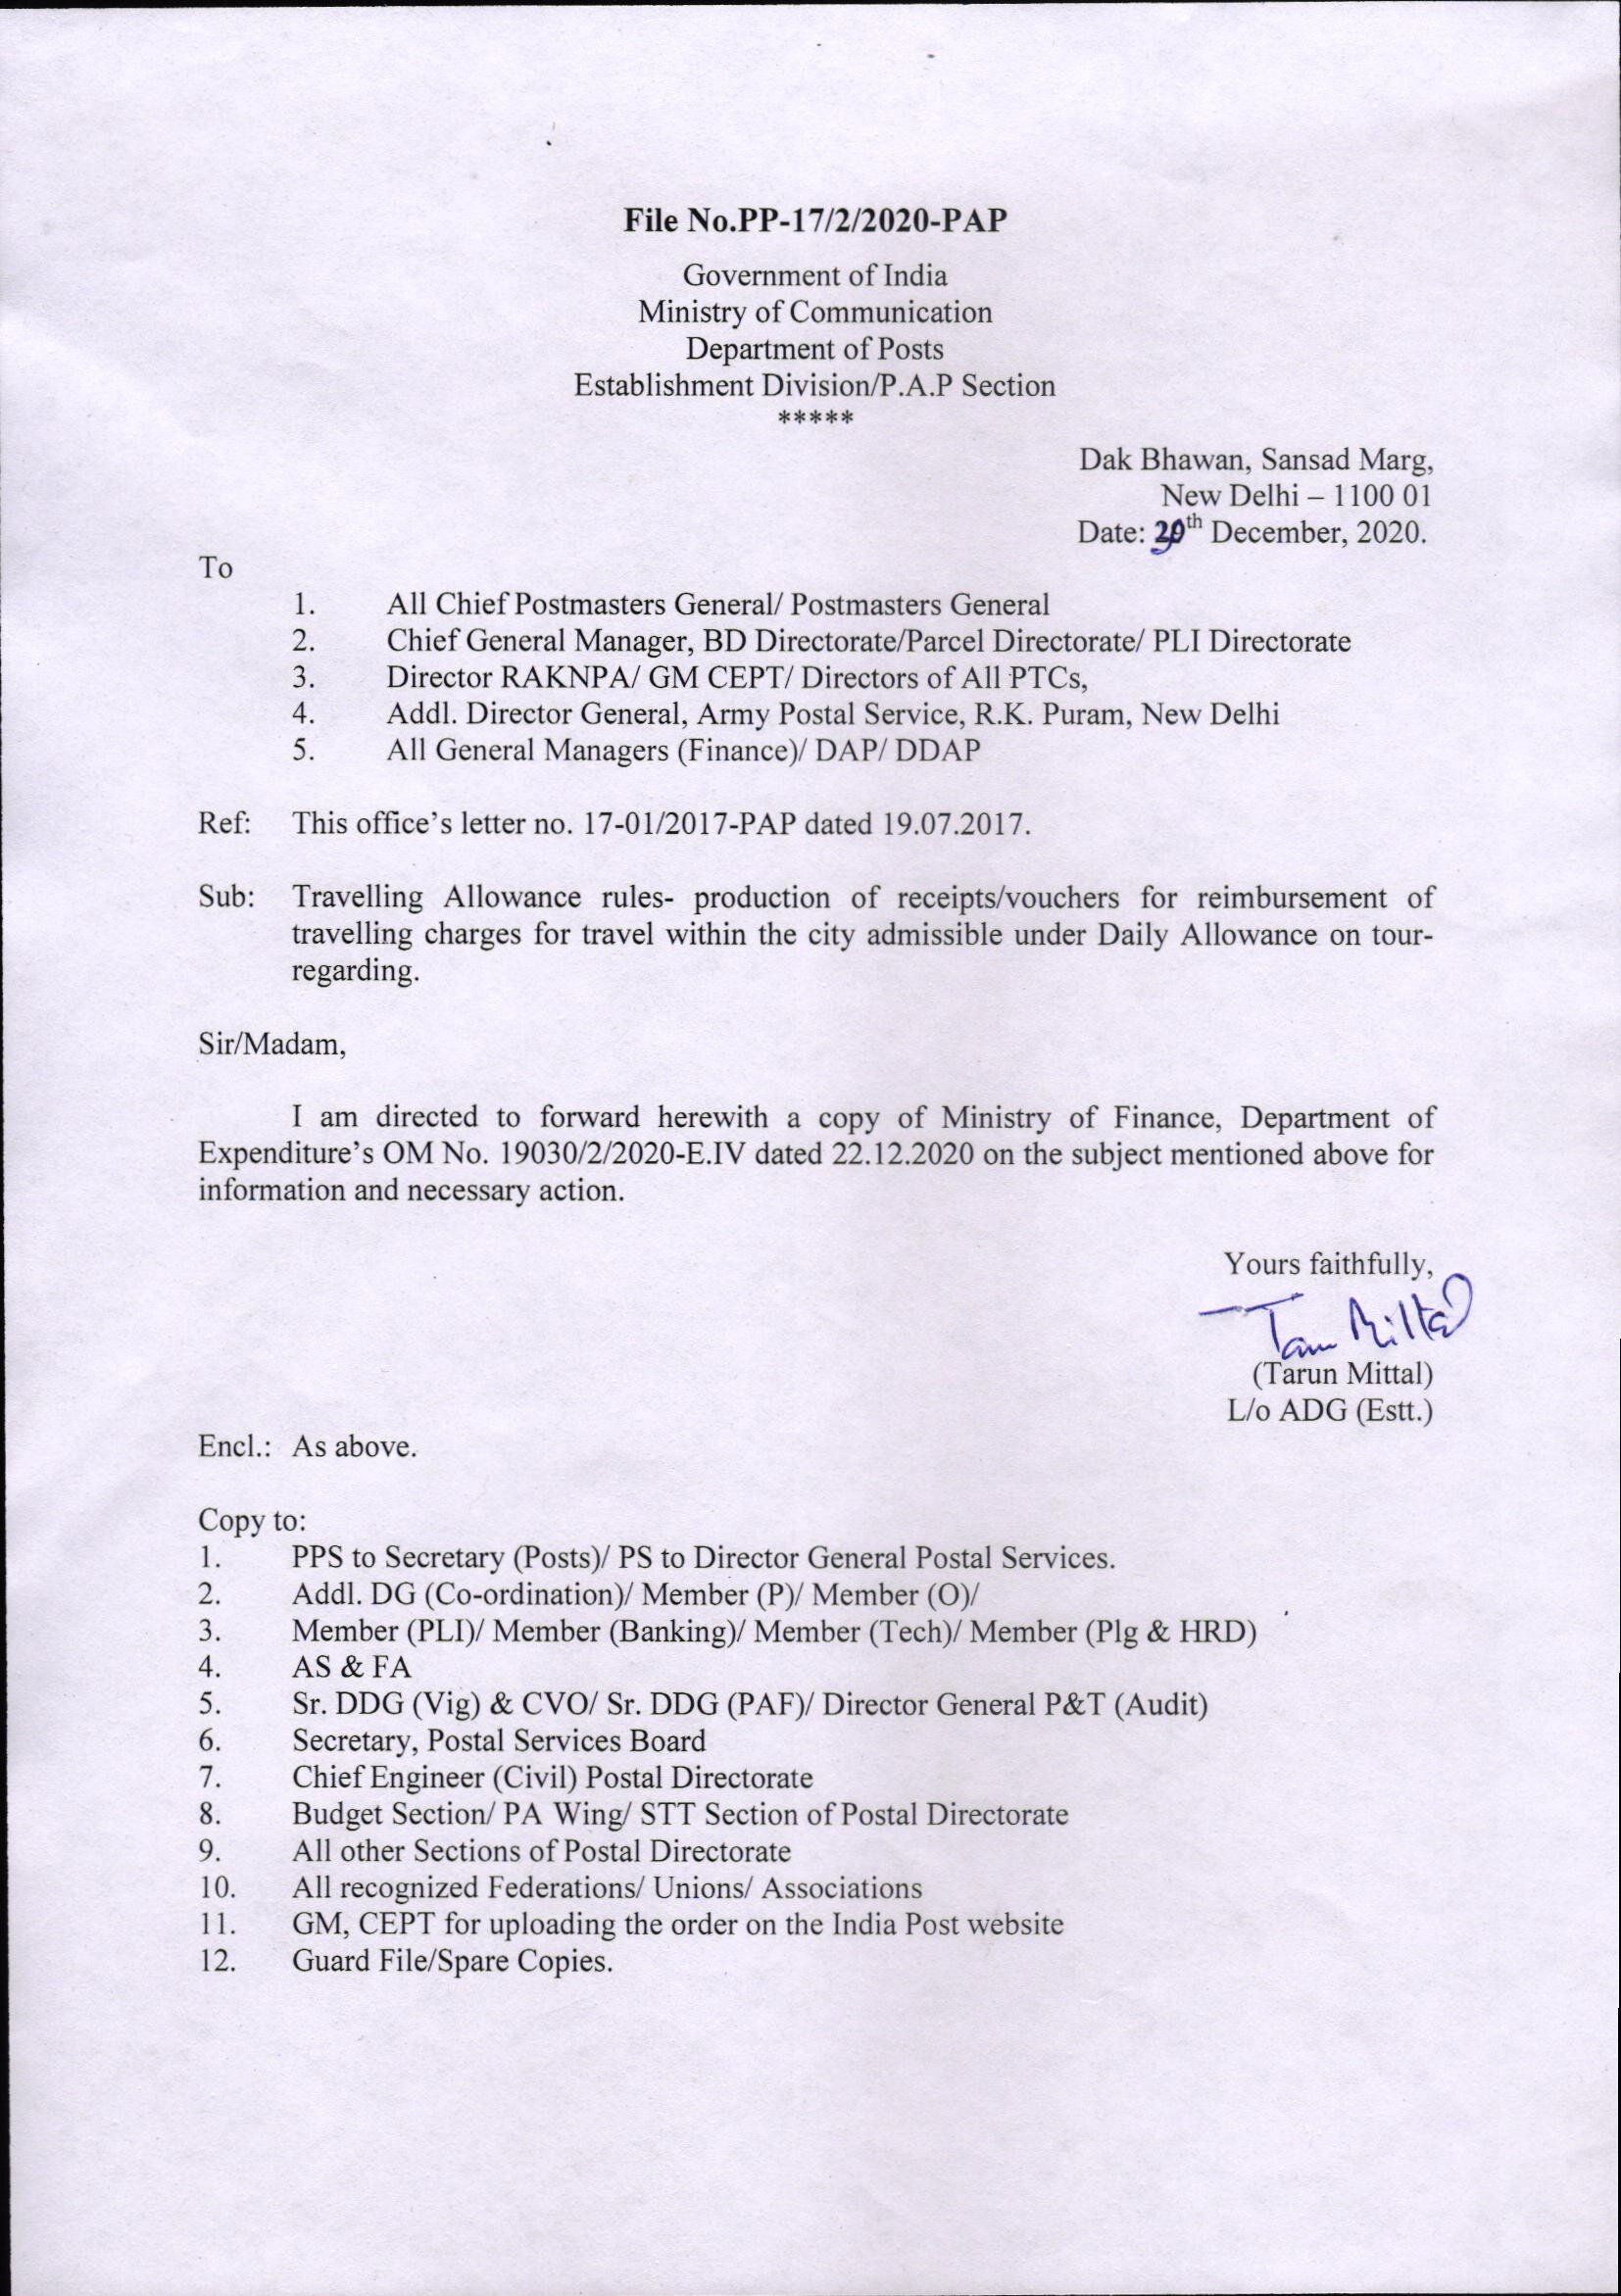 Department of Posts: Production of receipts/vouchers for reimbursement of travelling charges for travel within the city admissible under Daily Allowance on tour – regarding.